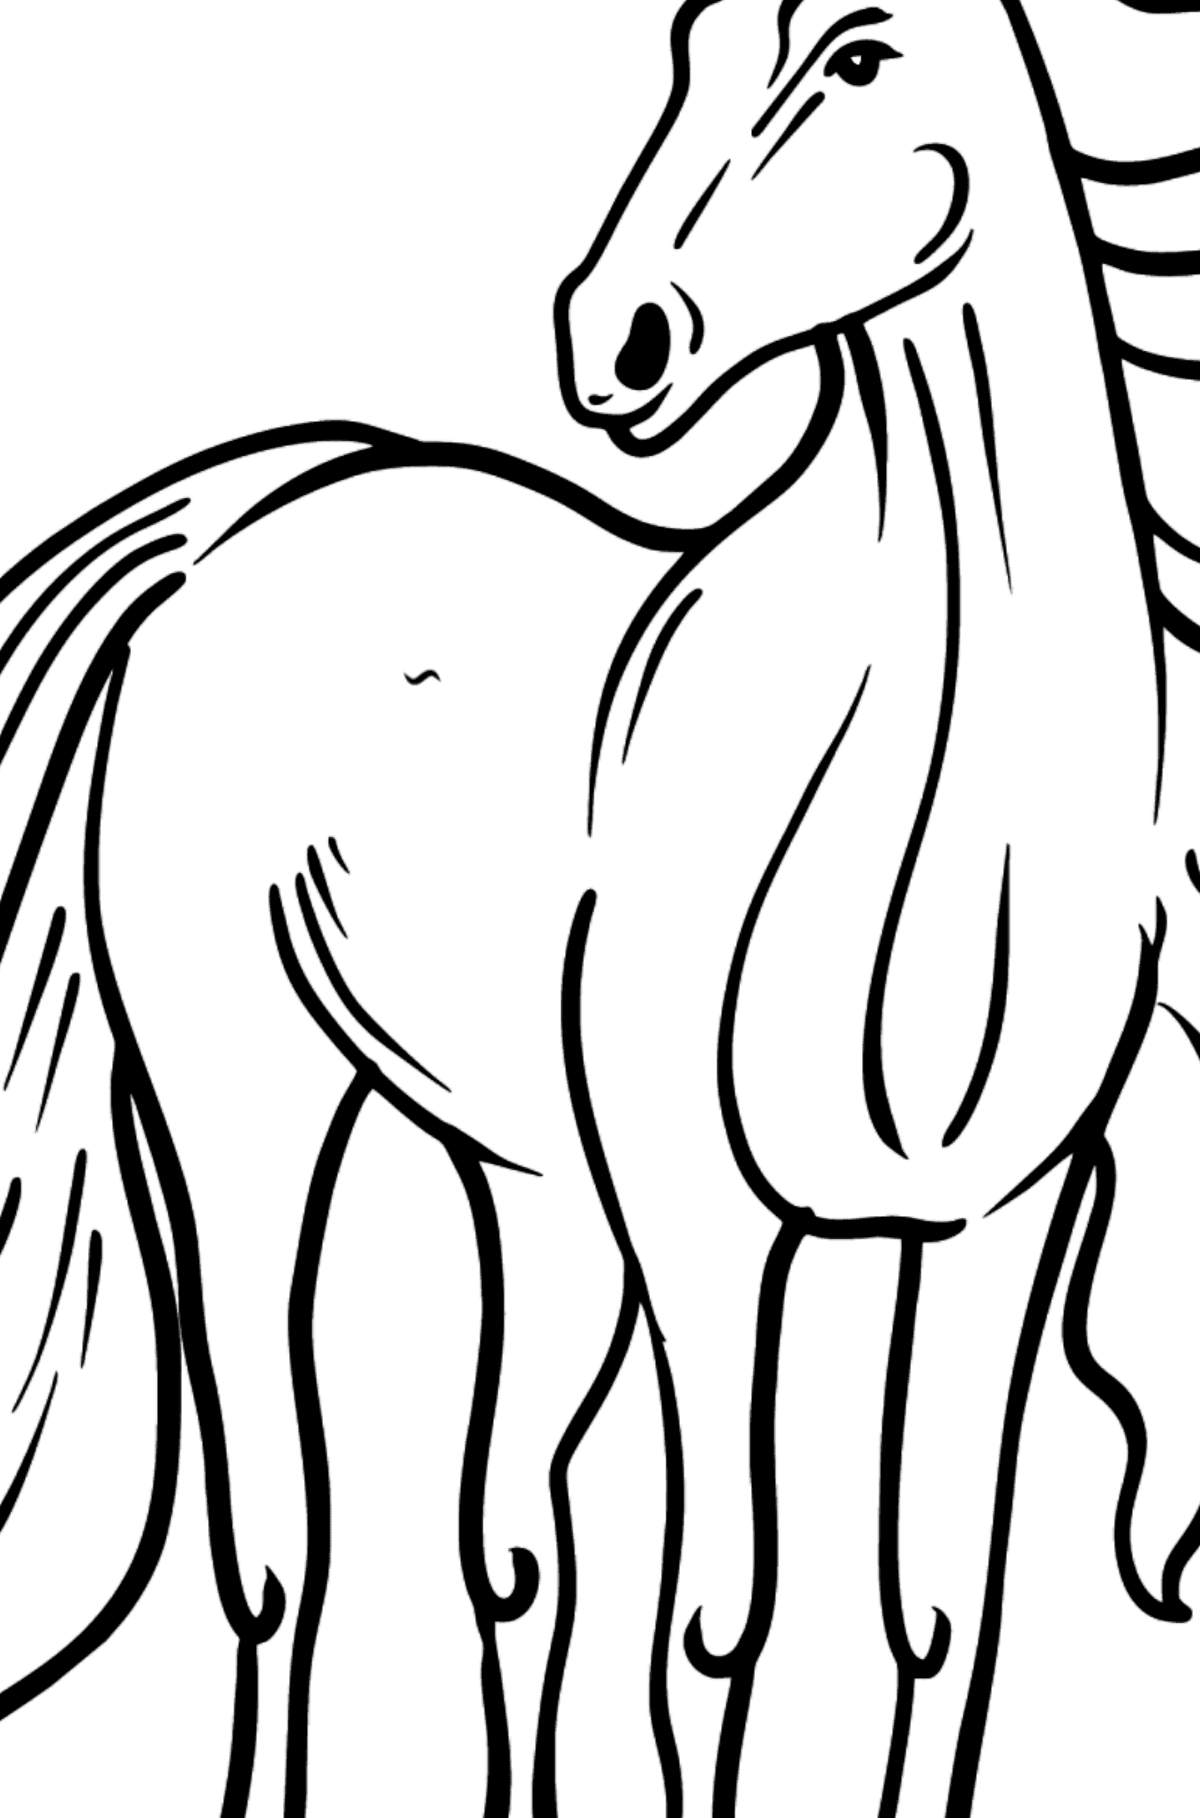 Horse coloring page - Coloring by Symbols for Kids